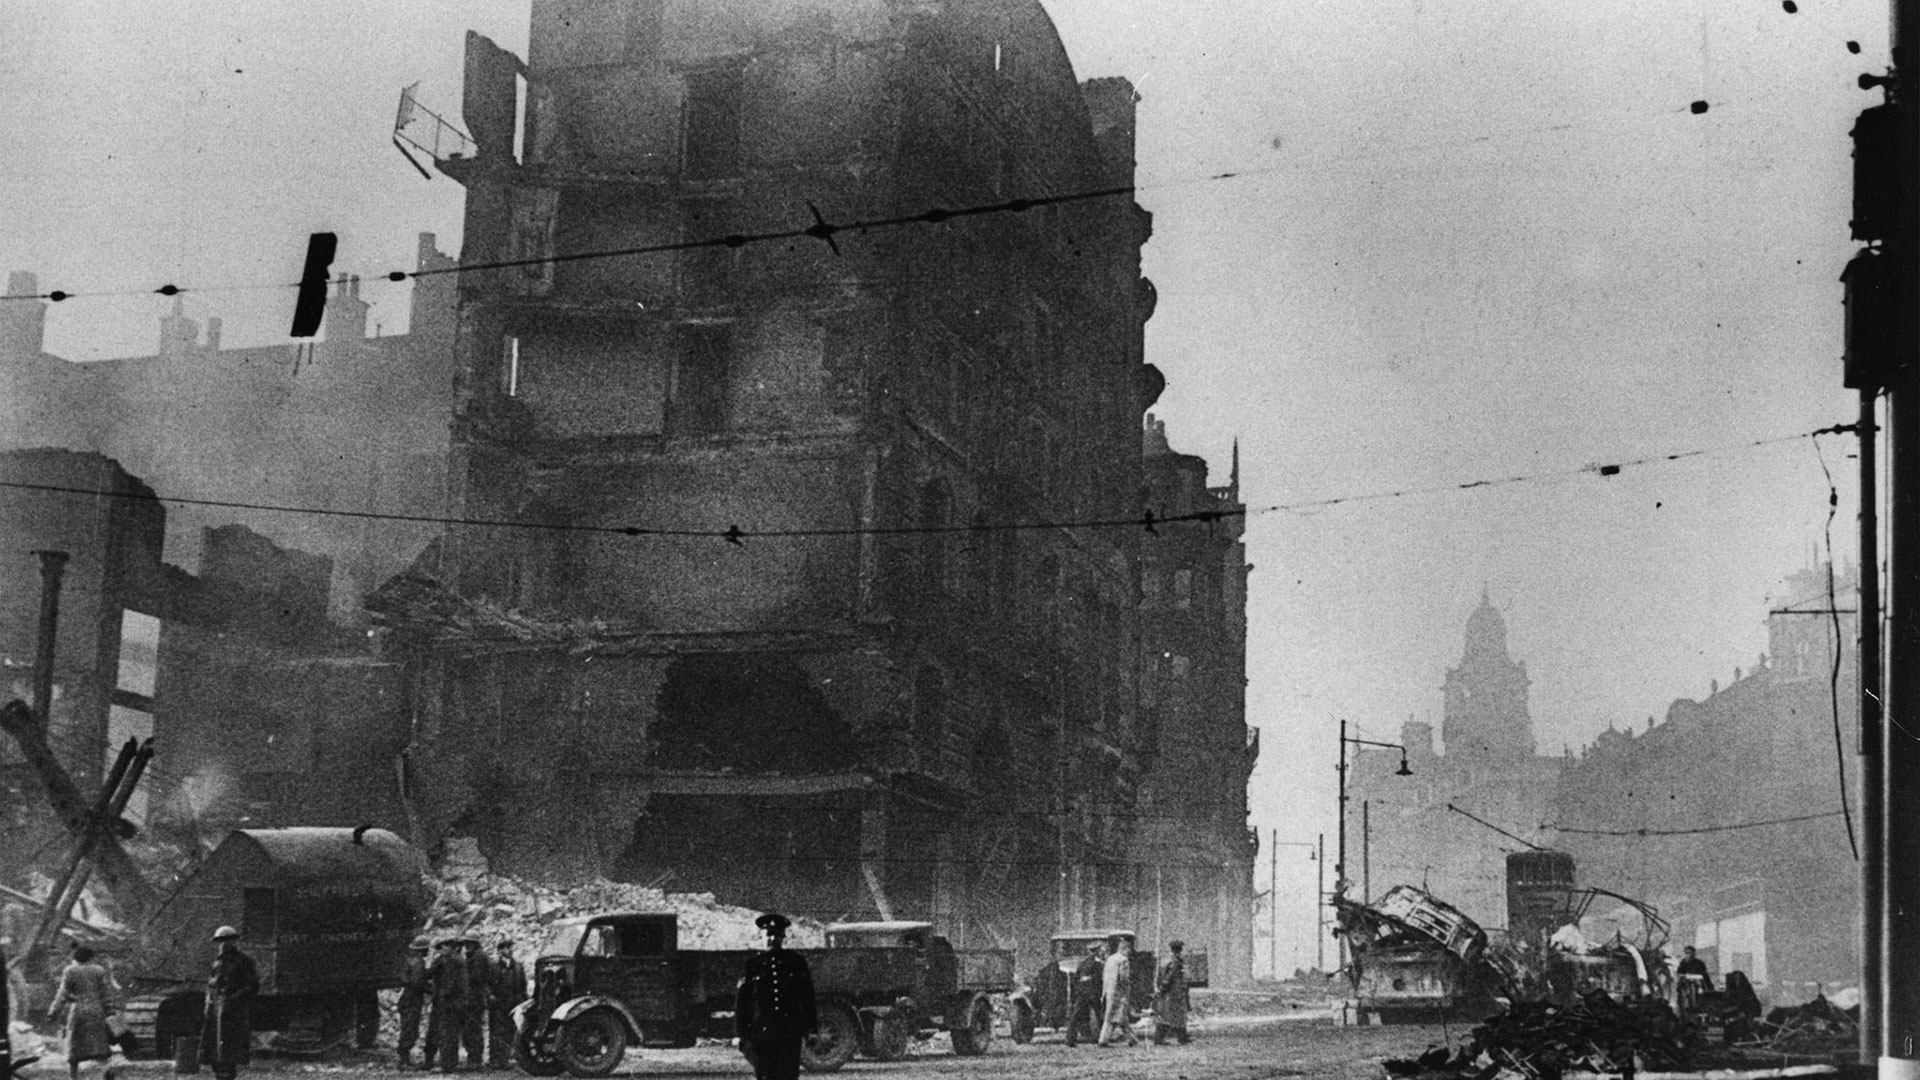 Marples Hotel in Sheffield's High St. after 1940 Blitz